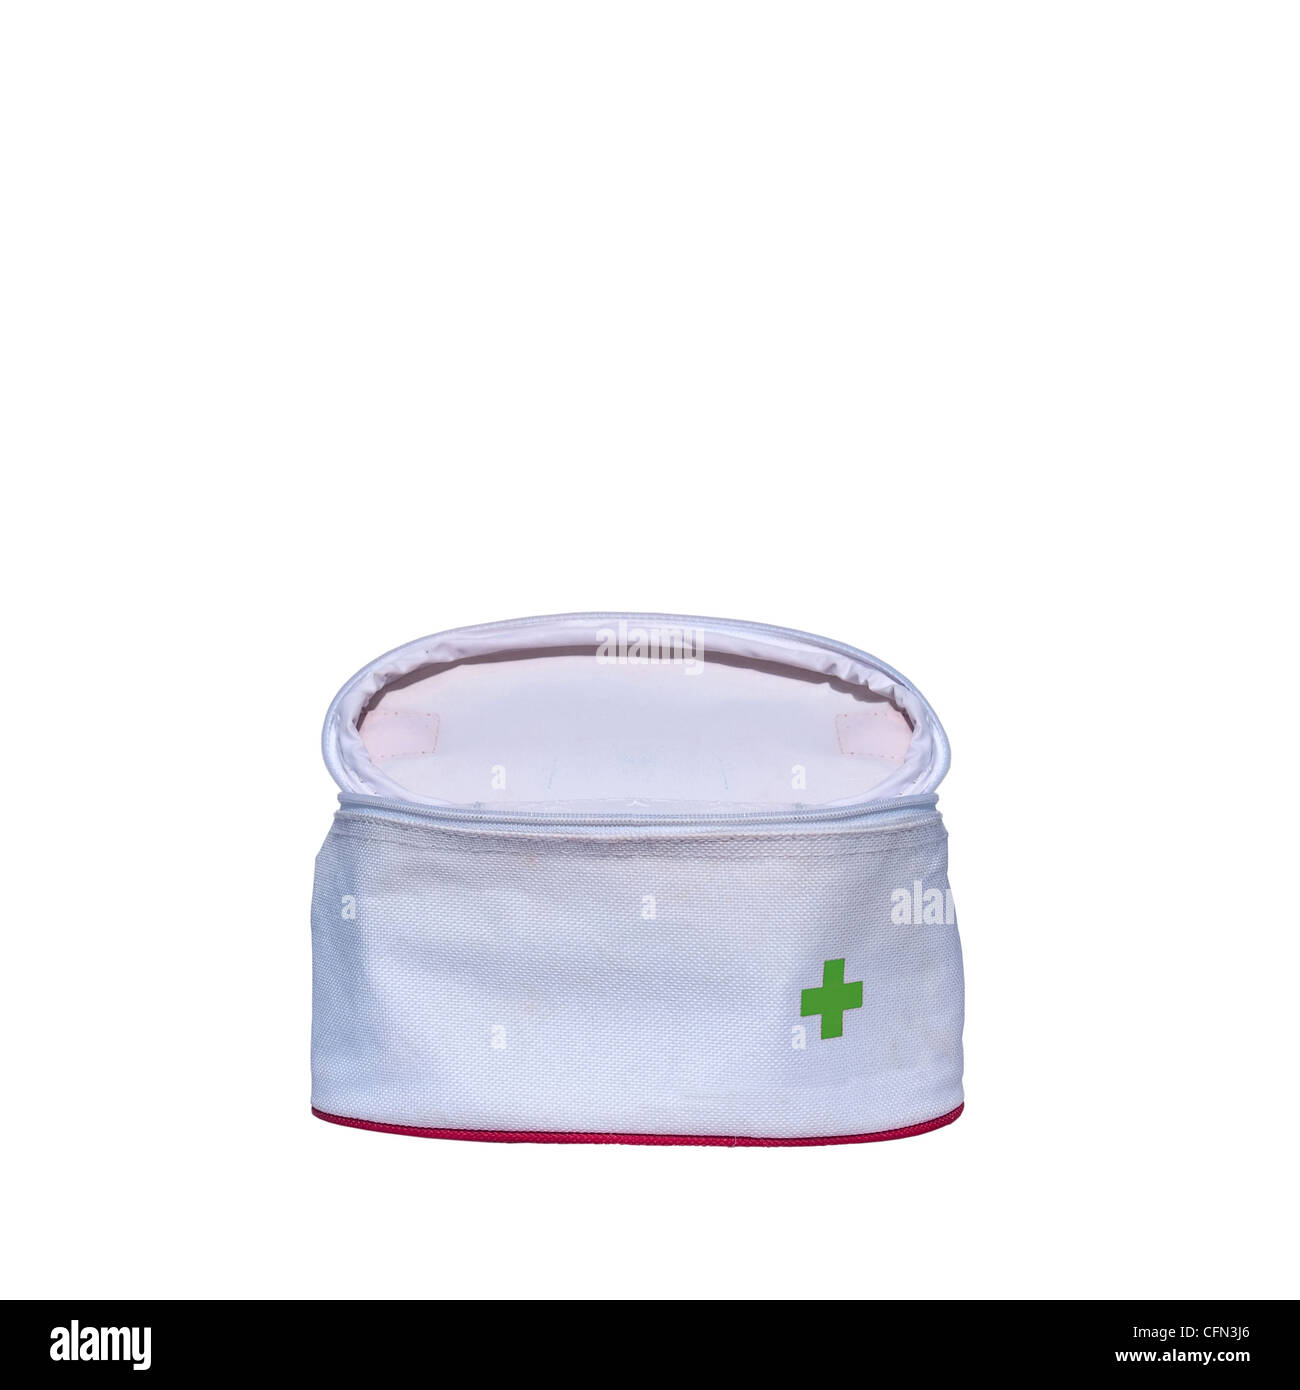 First aid bag Stock Photo